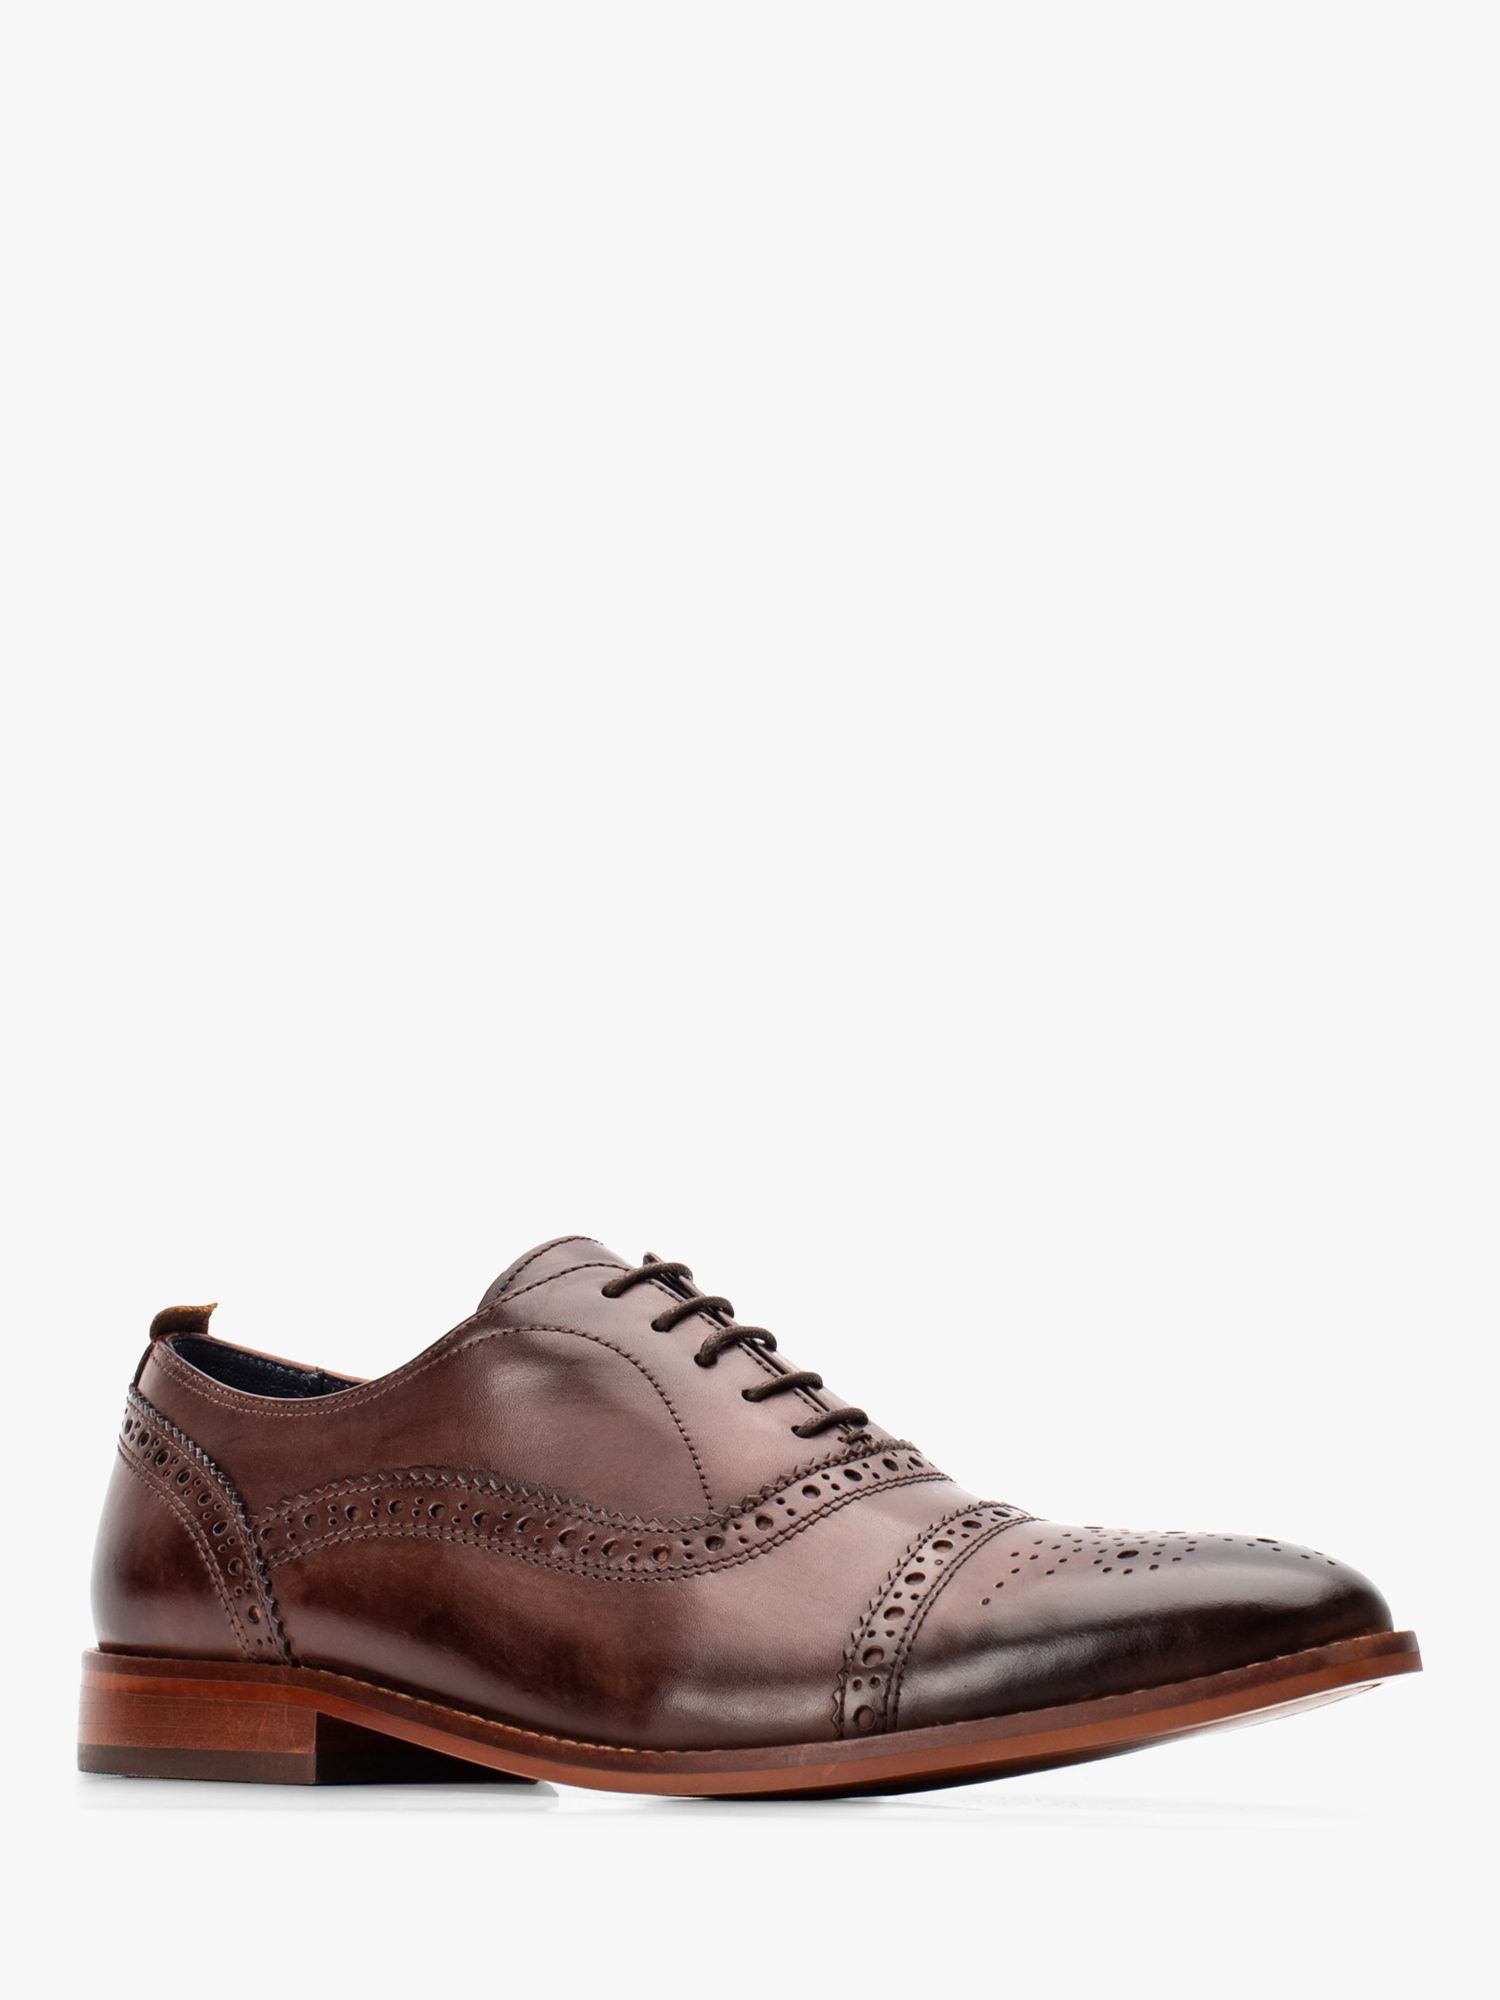 Base London Cast Washed Brogue Shoes, Brown, 9